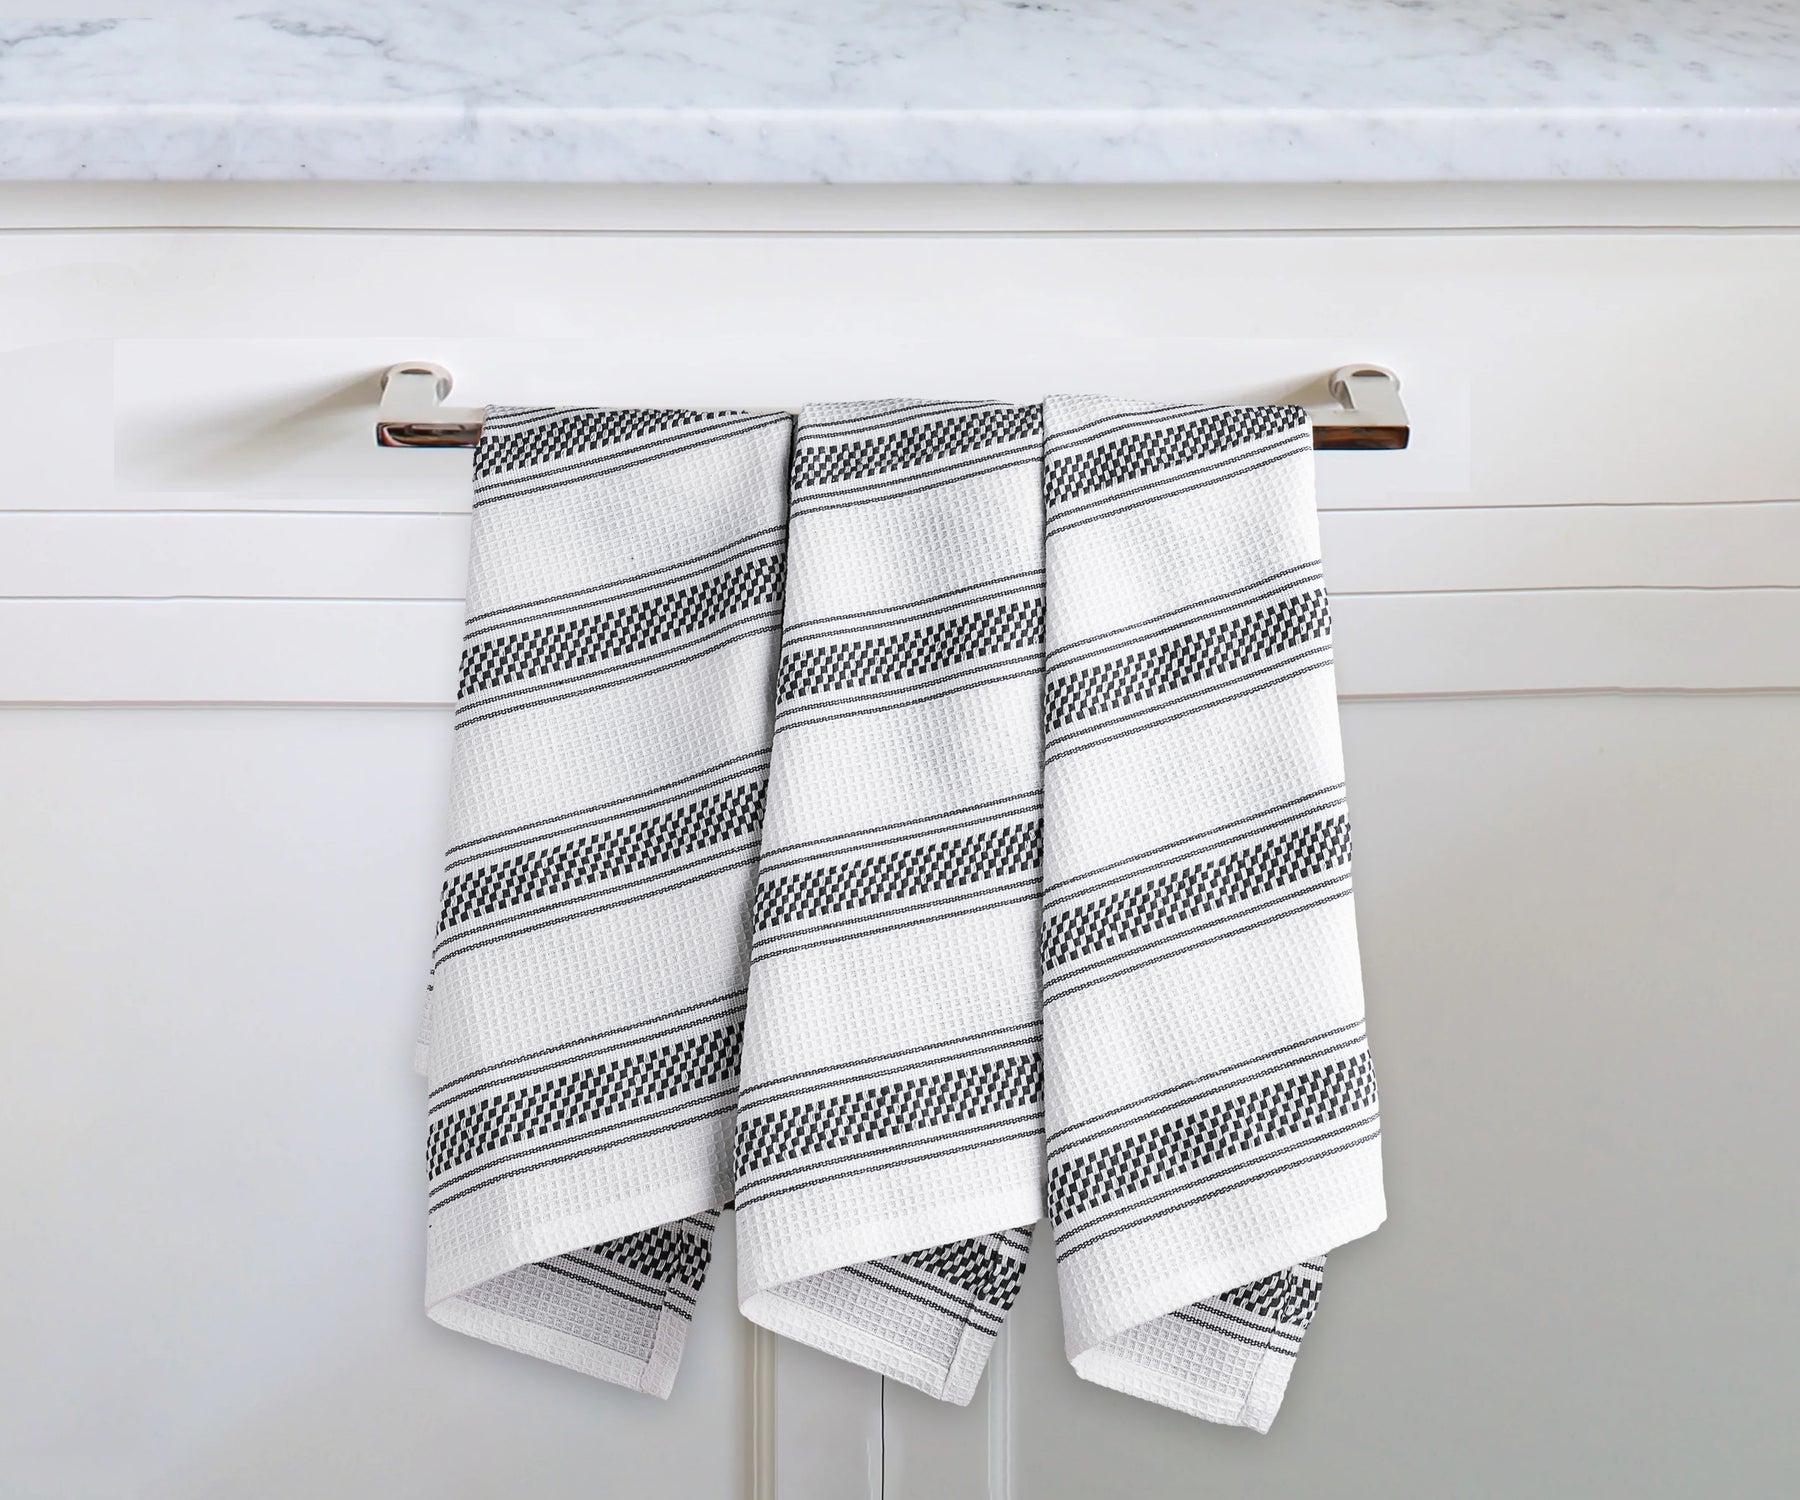 decorative kitchen towels can add a touch of elegance and sophistication to your kitchen decor. 